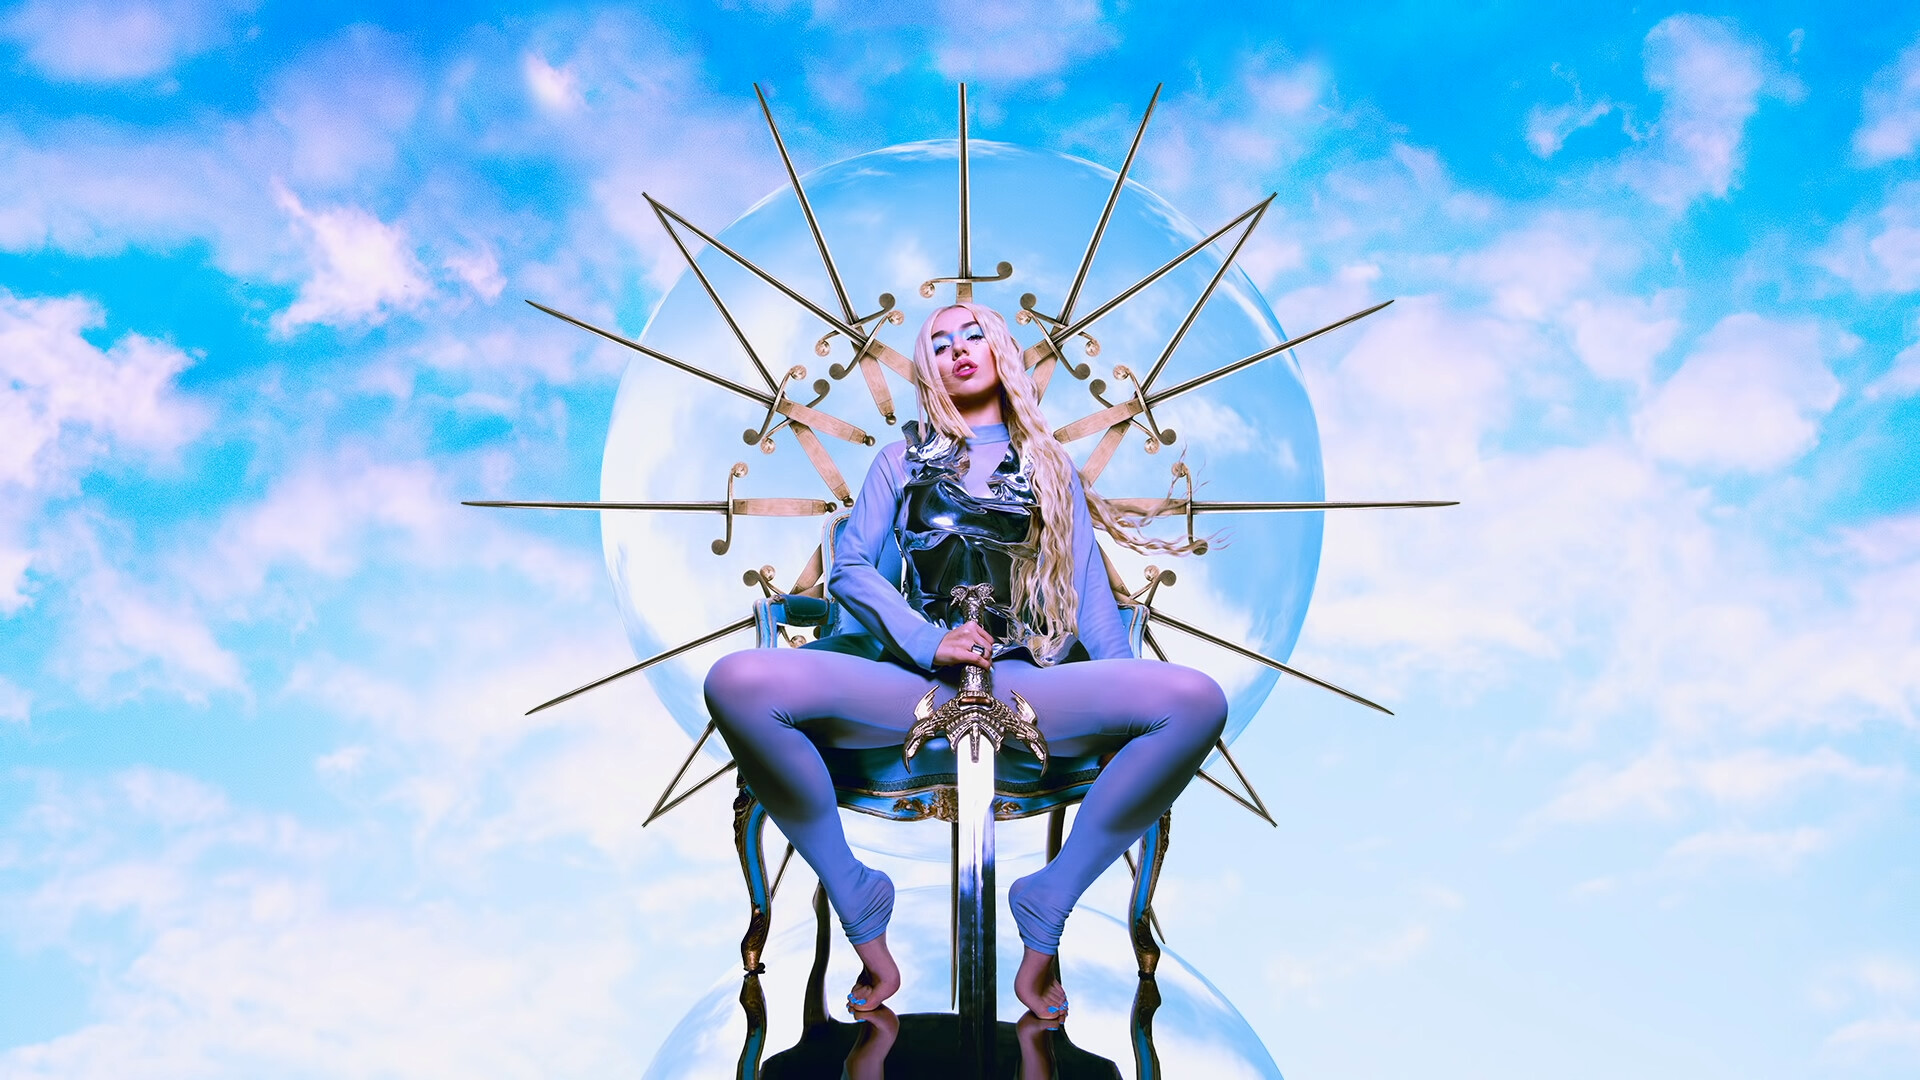 Ava Max: "Kings & Queens" peaked at number 13 on the US Billboard Hot 100. 1920x1080 Full HD Wallpaper.